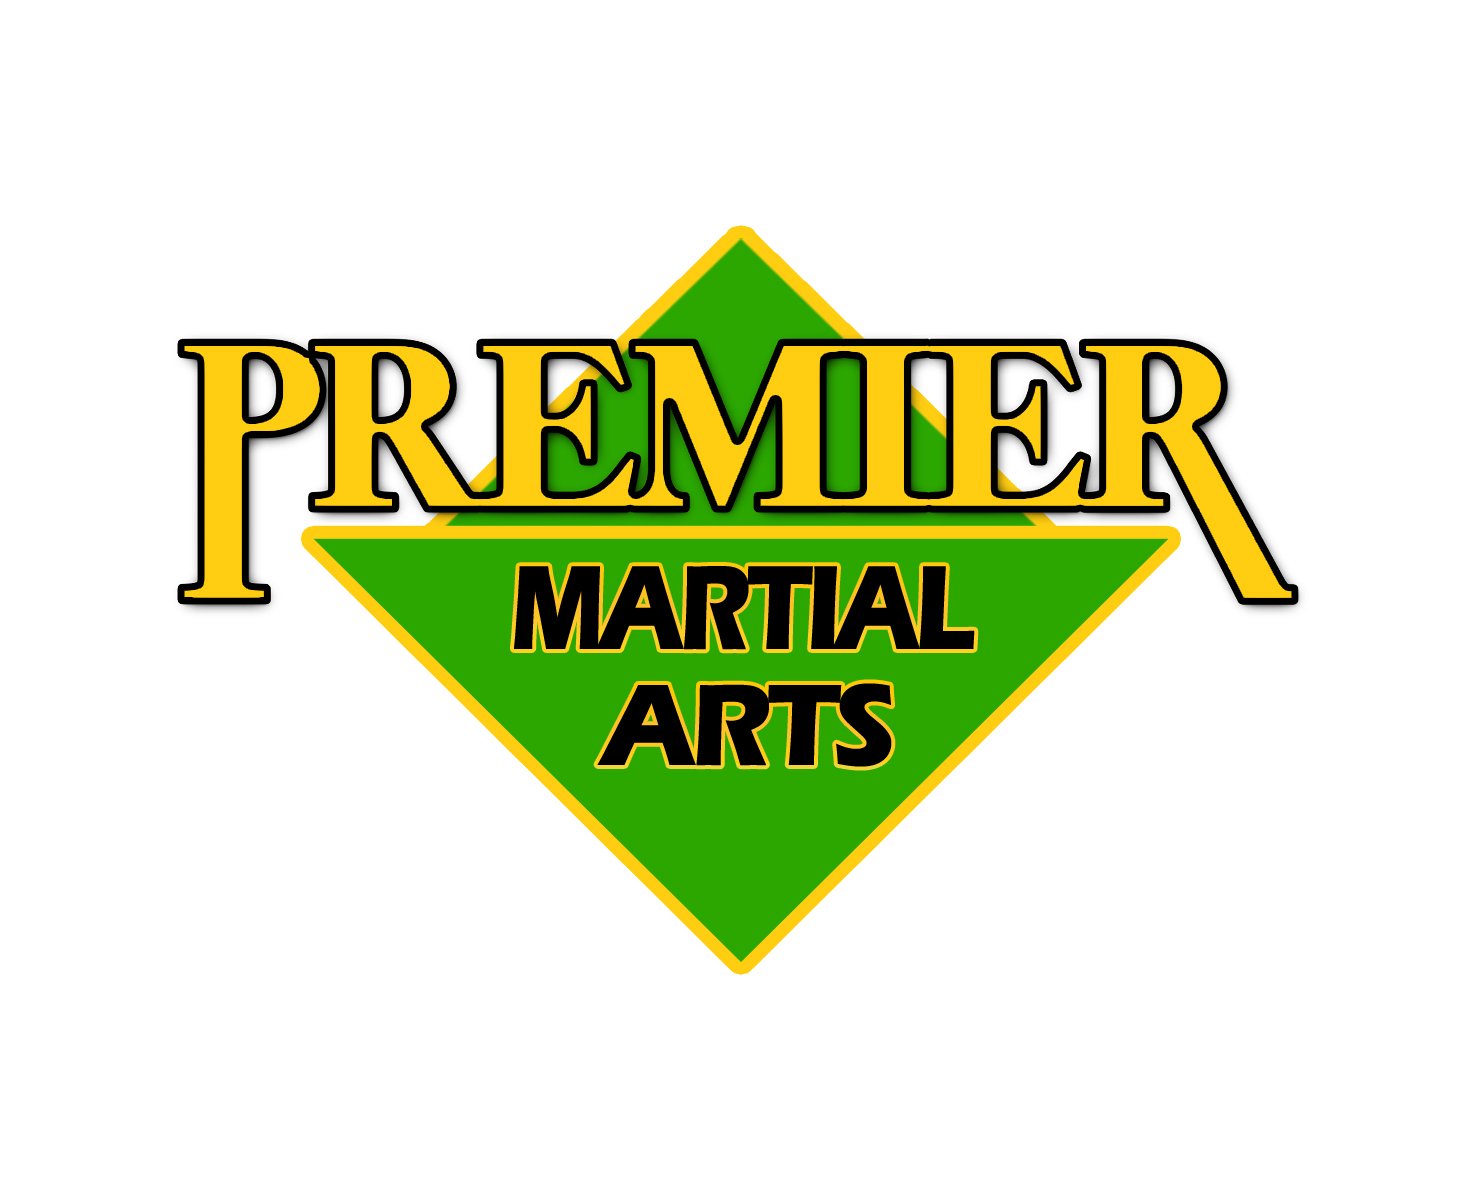 Premier Martial Arts CO specializes in kids' and adult mixed martial arts, Krav Maga, kickboxing and  jiu jitsu (Crossfit too, https://t.co/IRjRxmpGv6).